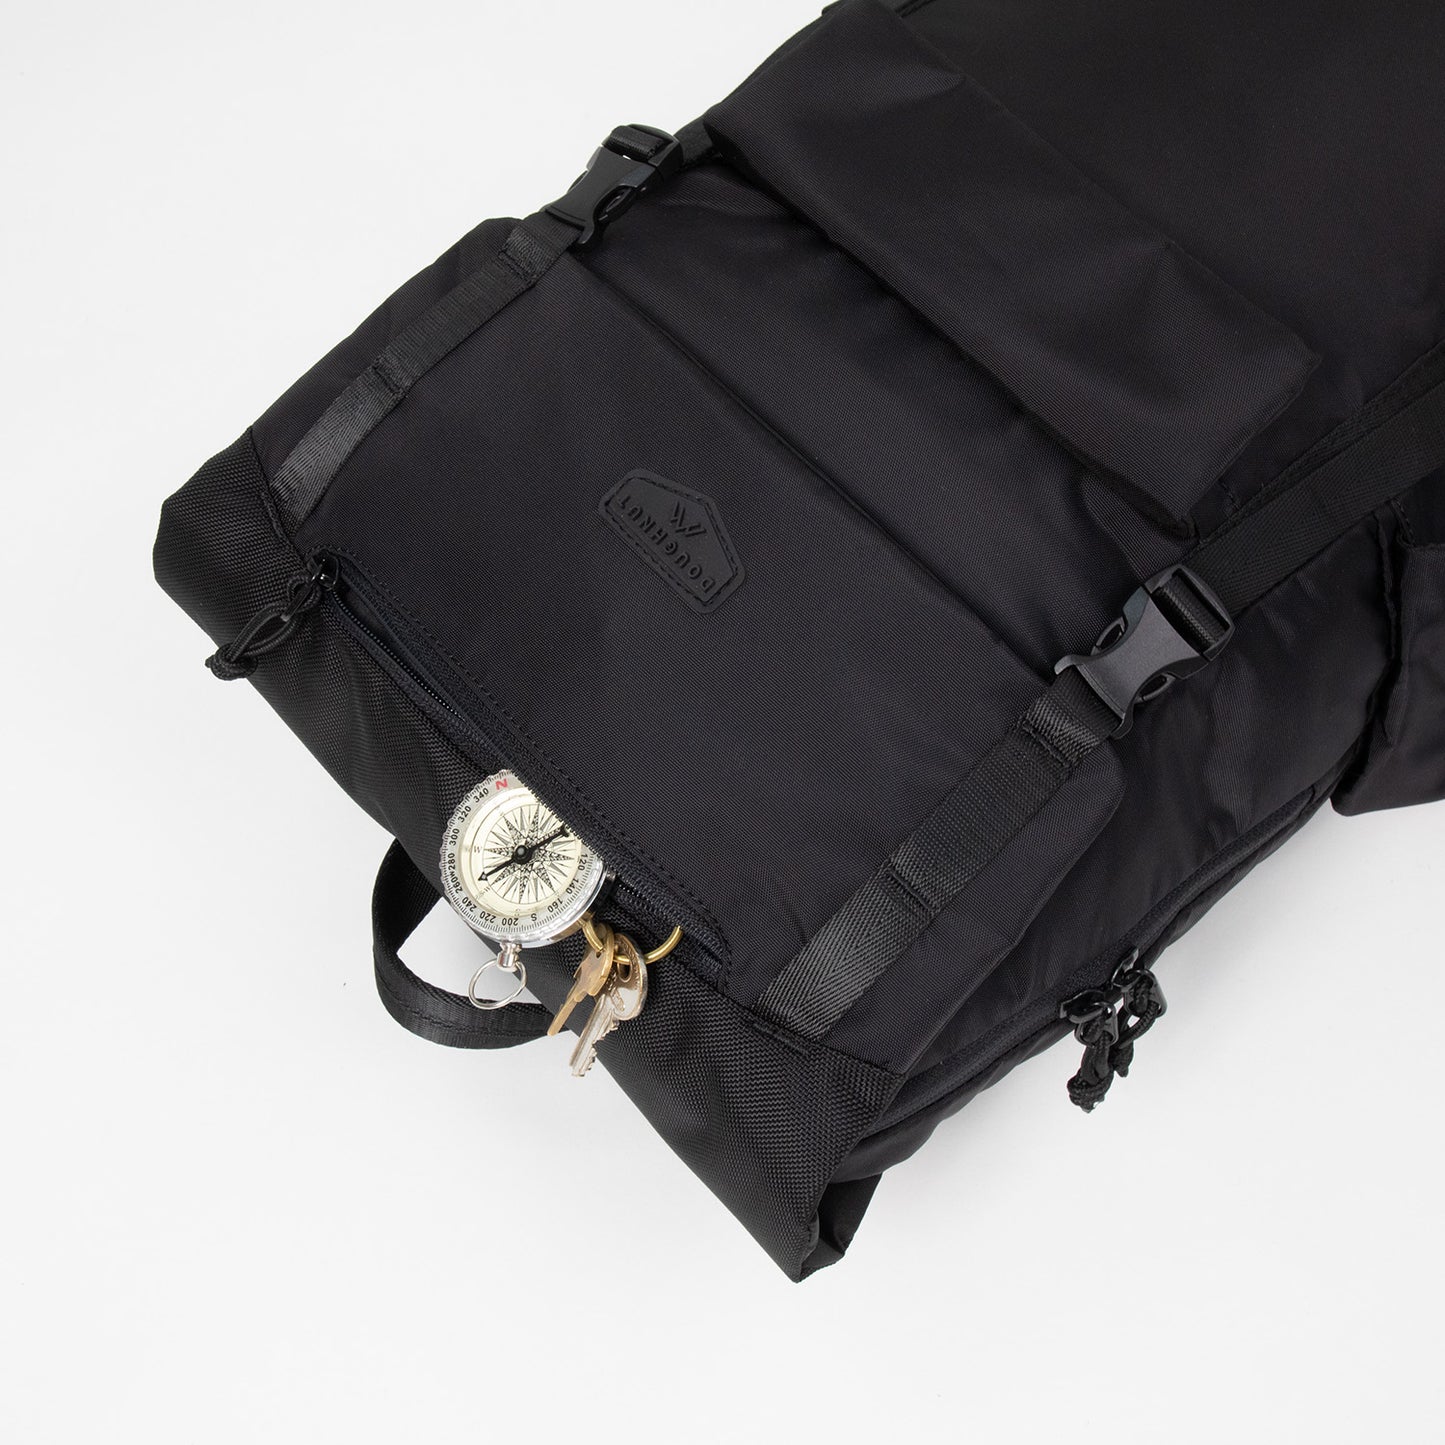 Lucid The Actualise Series Backpack